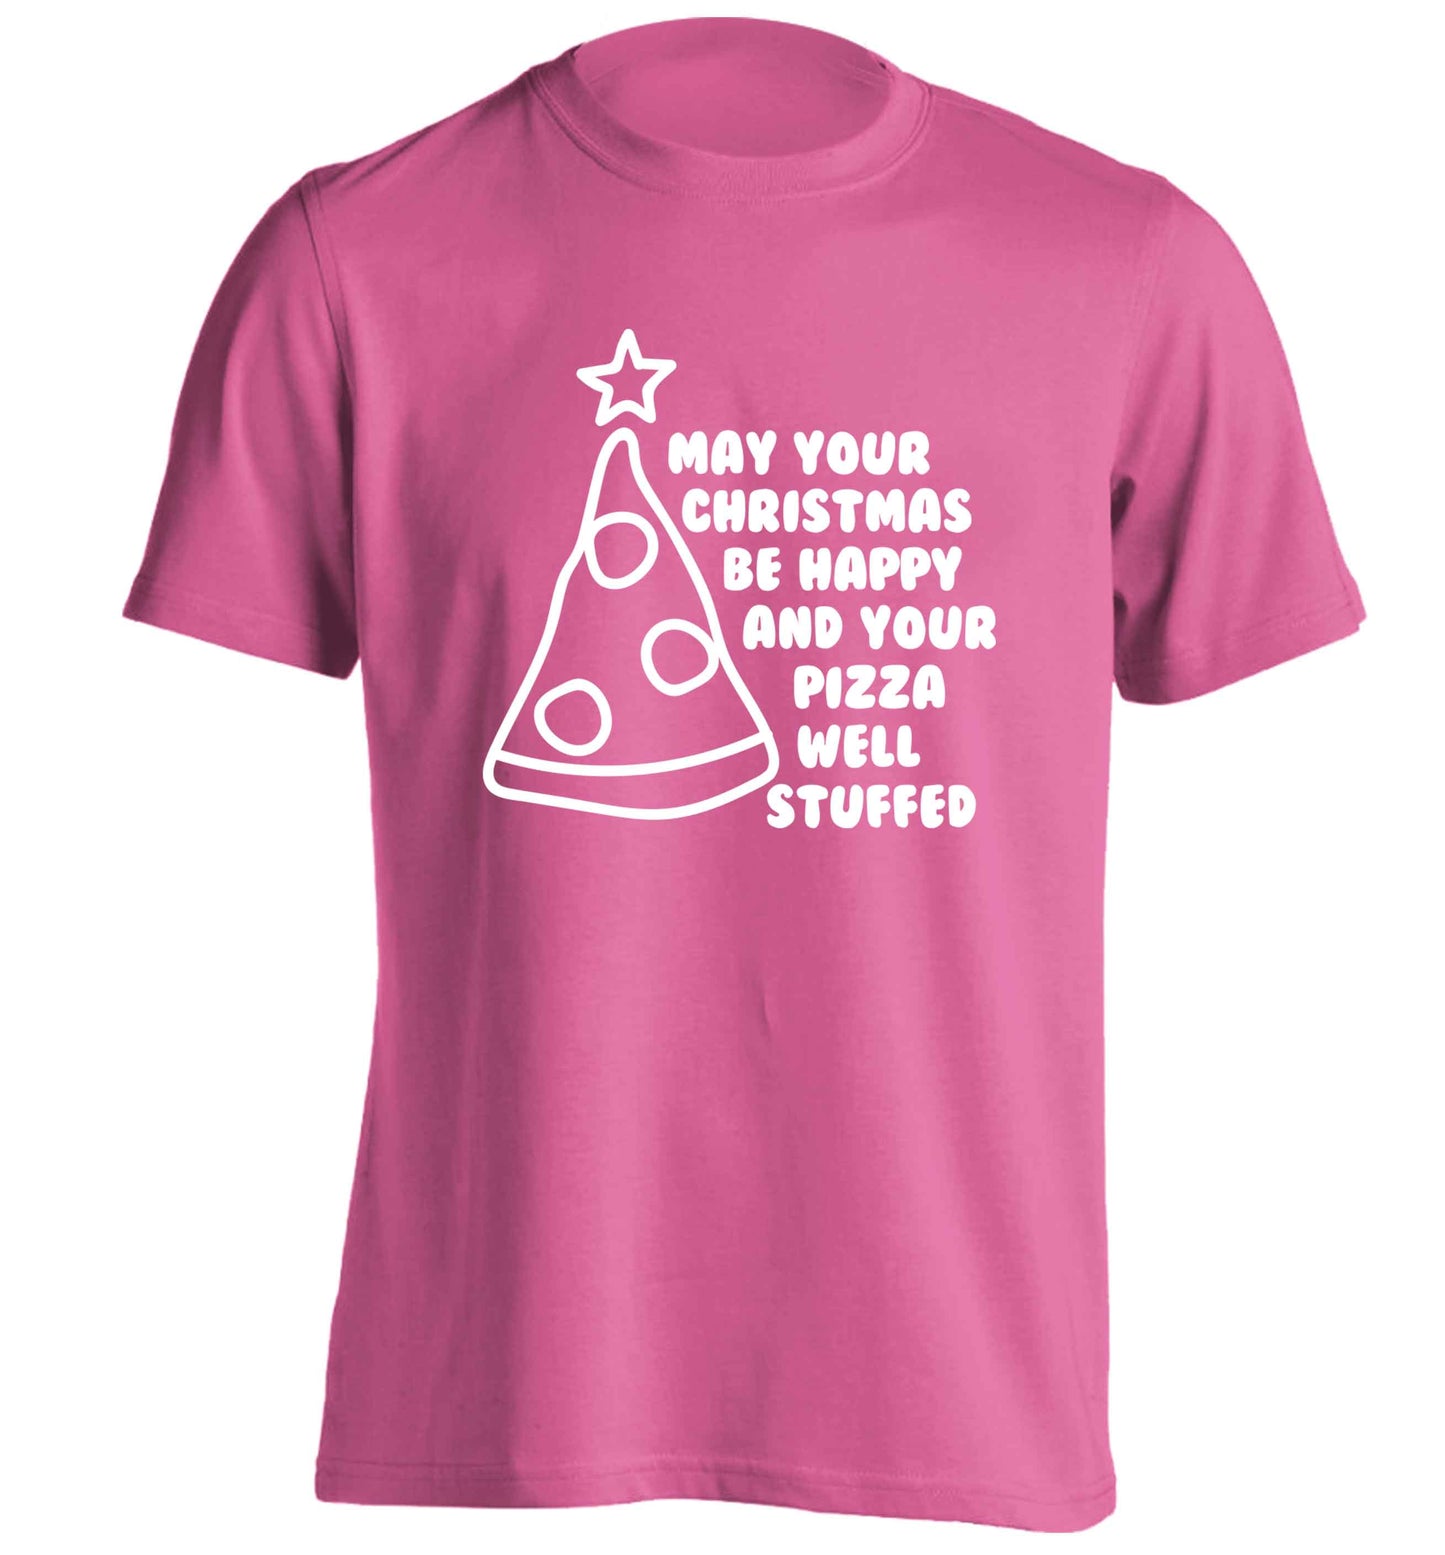 May your Christmas be happy and your pizza well stuffed adults unisex pink Tshirt 2XL